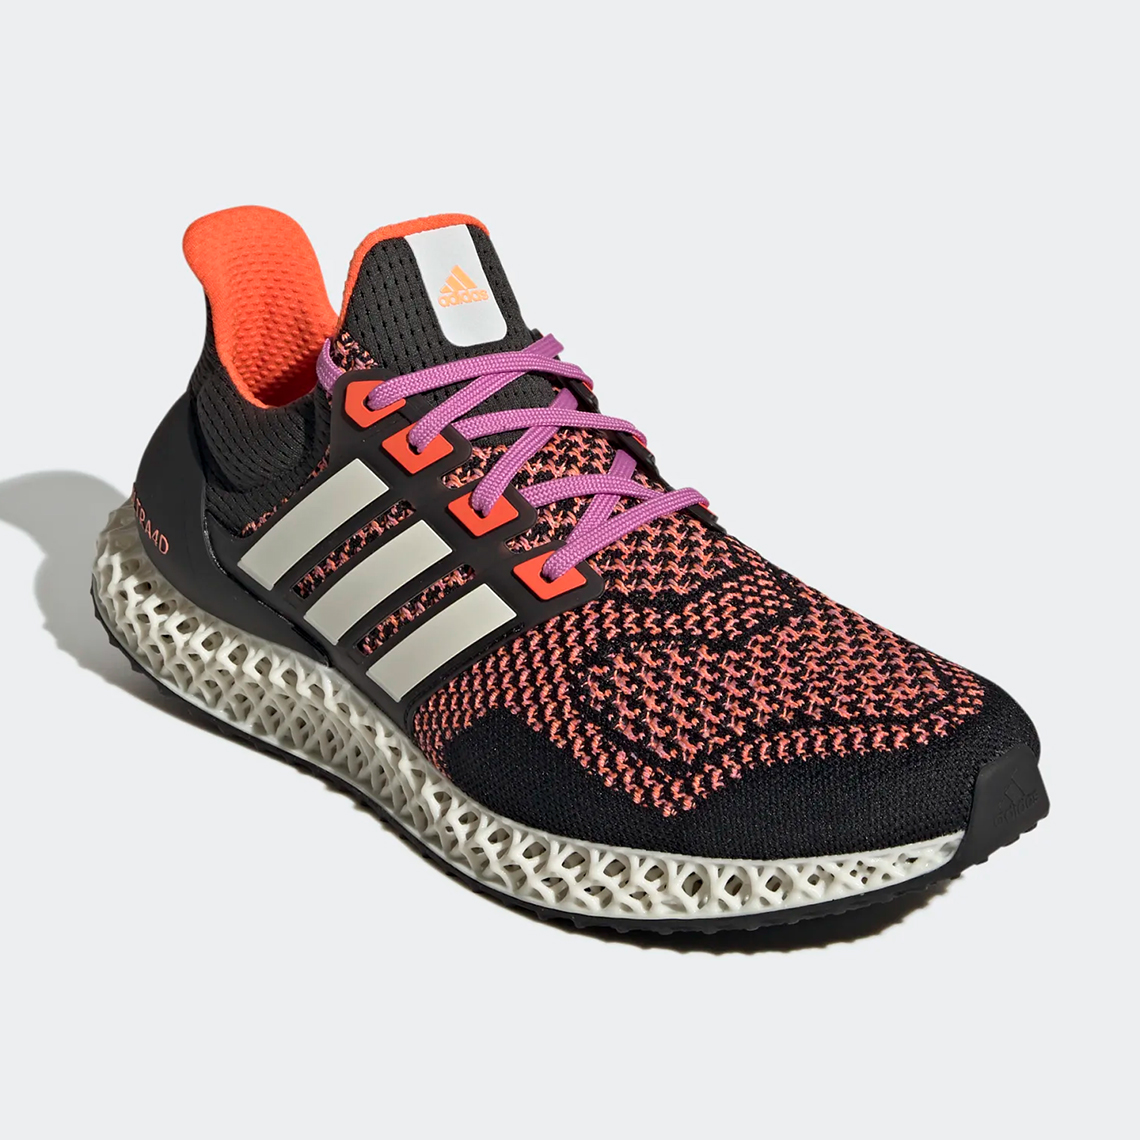 adidas ultra 4d solar red pulse lilac GY5913 4